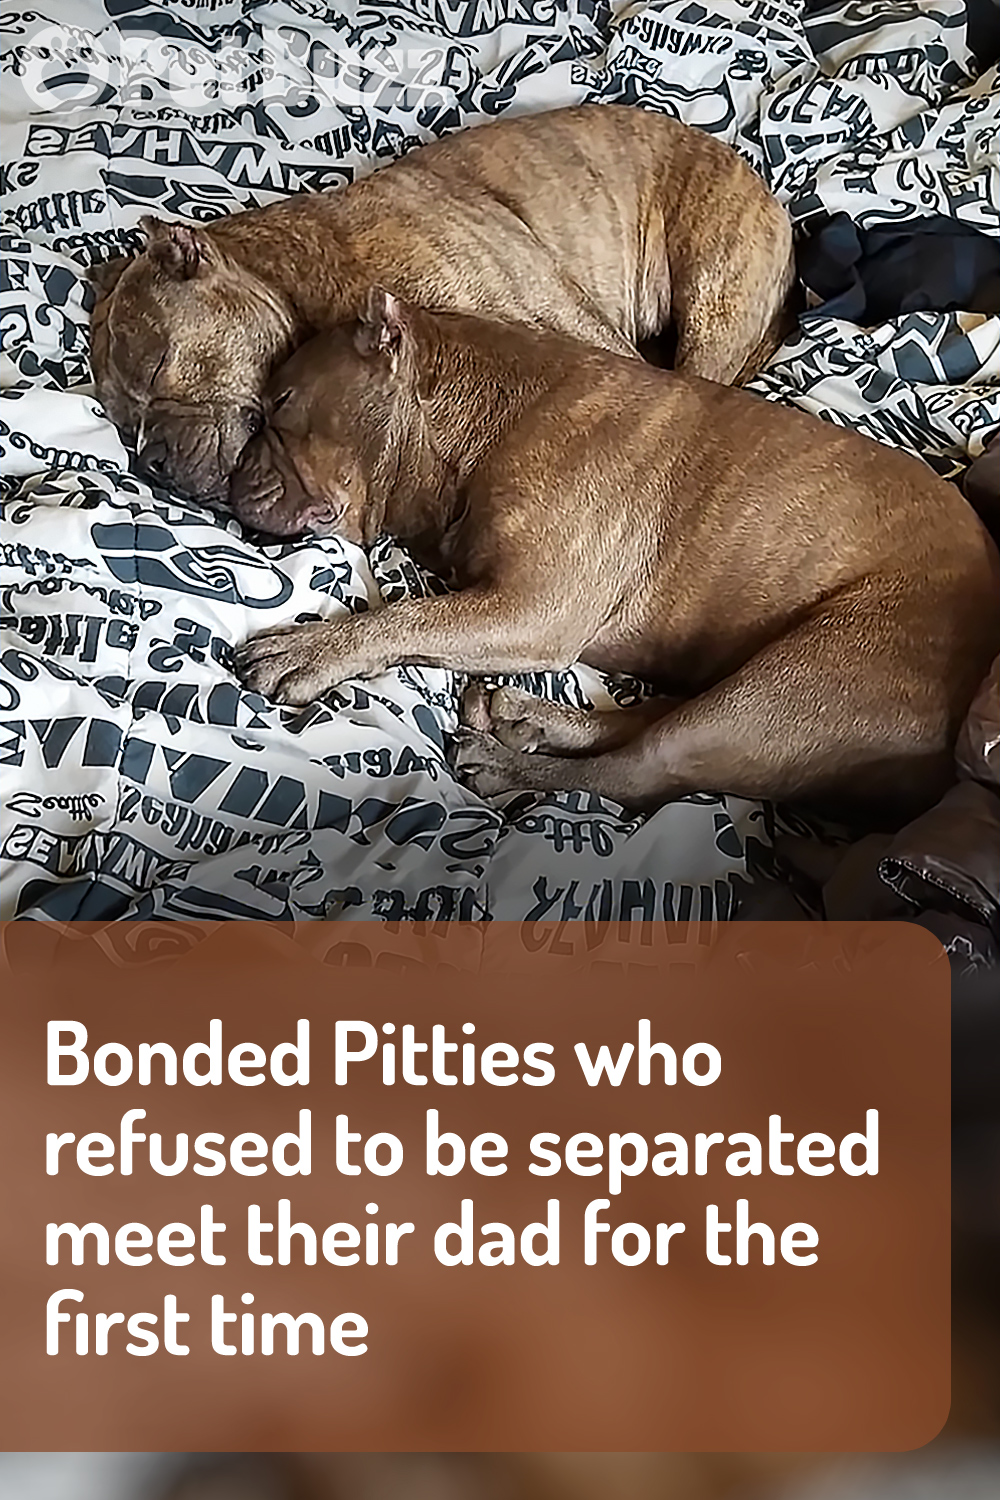 Bonded Pitties who refused to be separated meet their dad for the first time